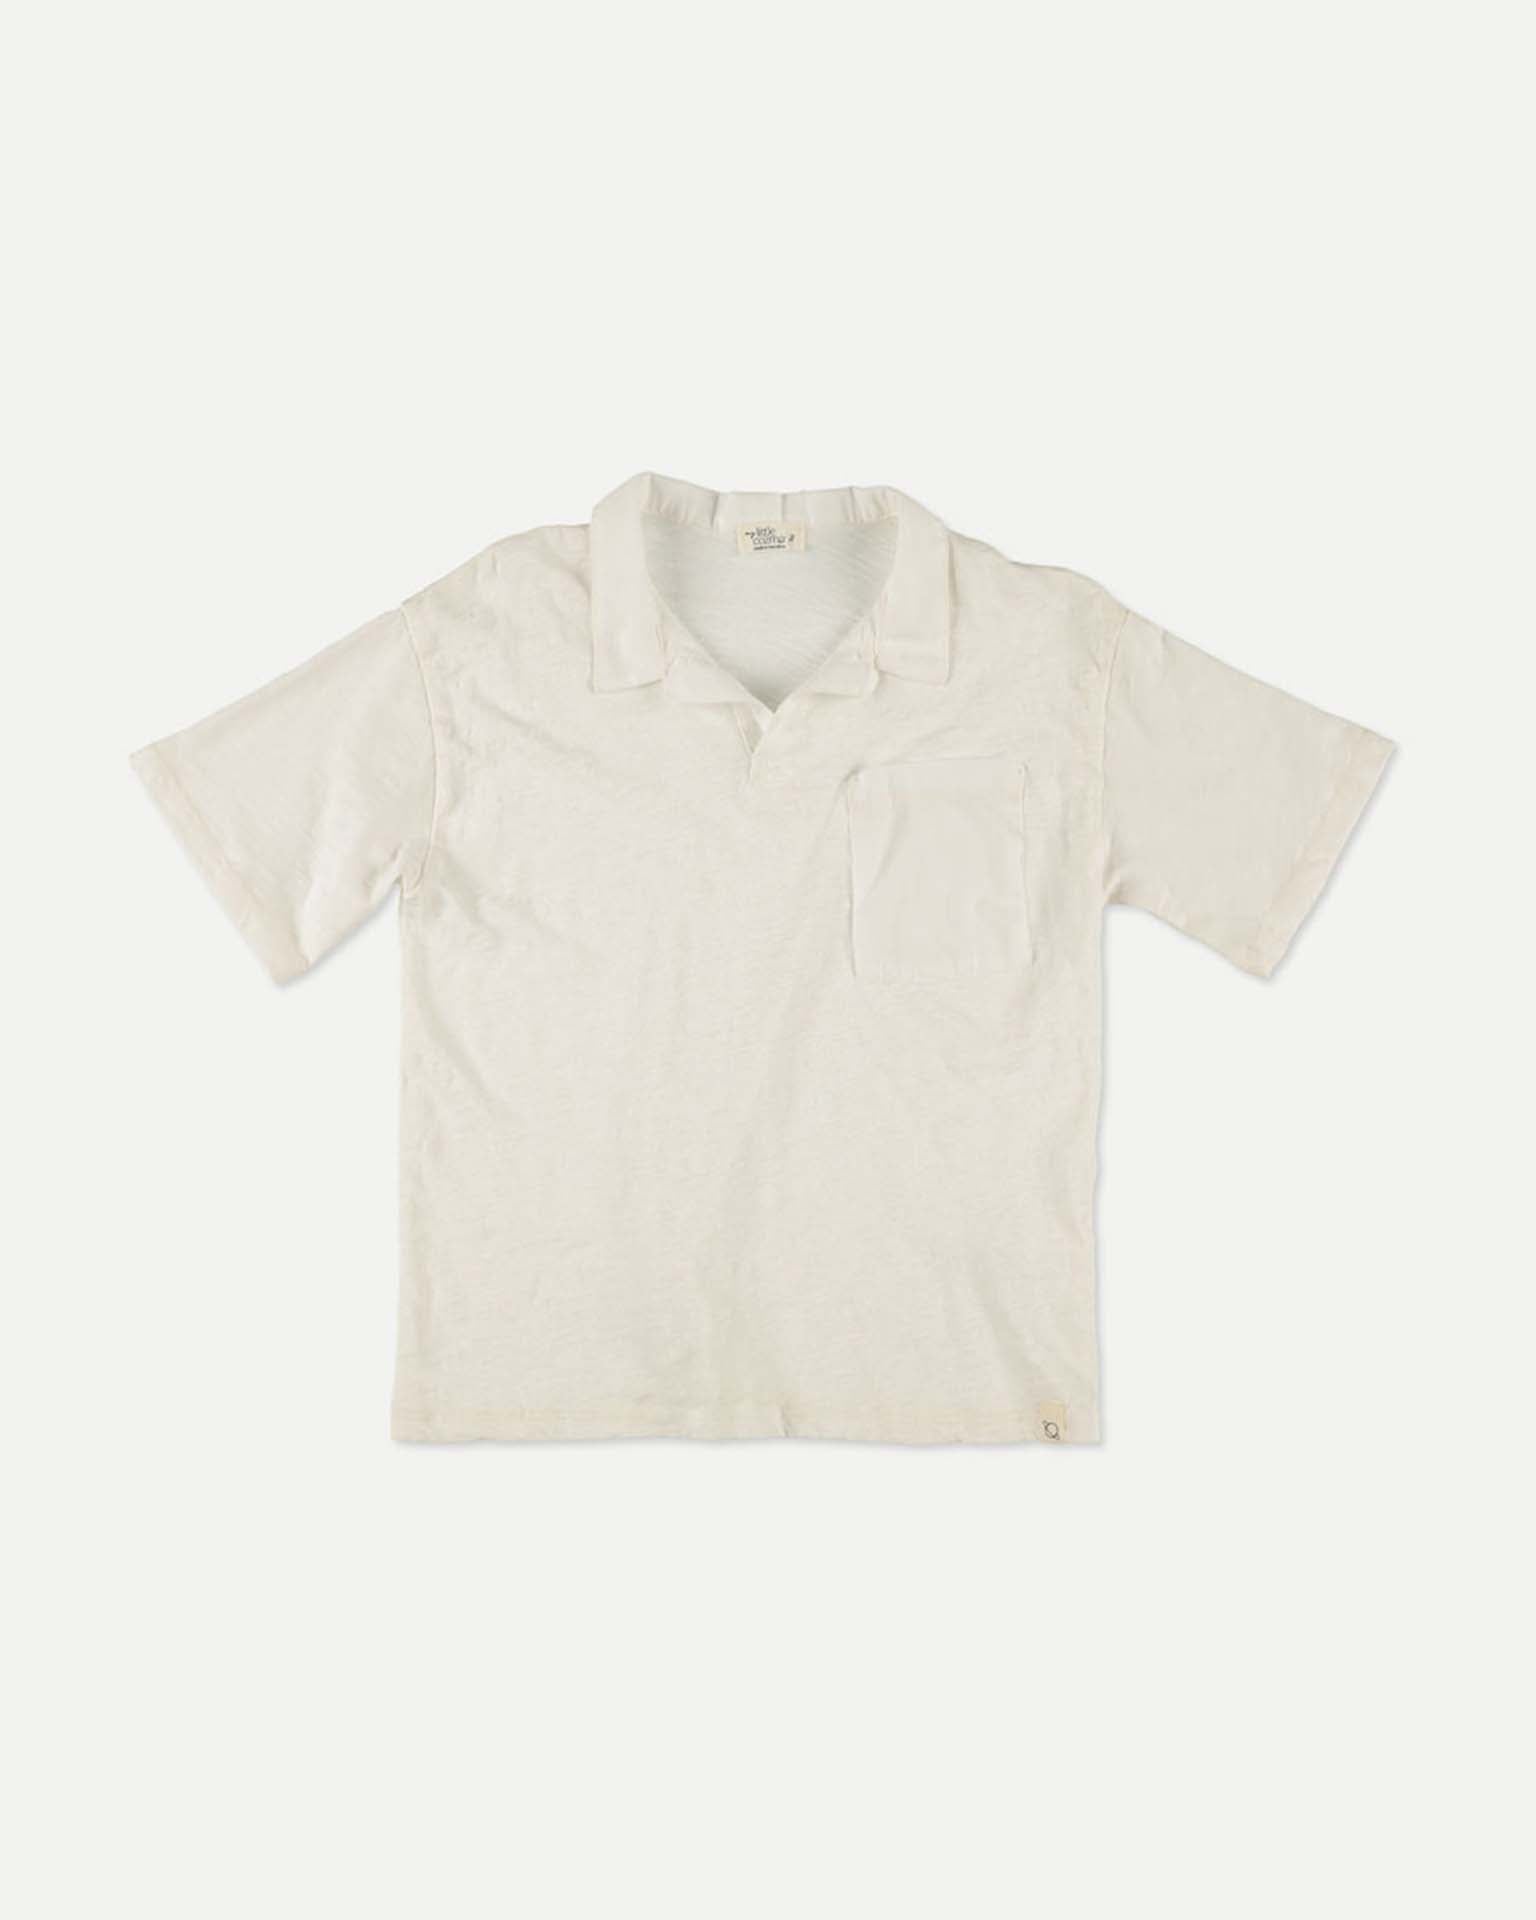 Little my little cozmo kids arnold polo tee in ivory